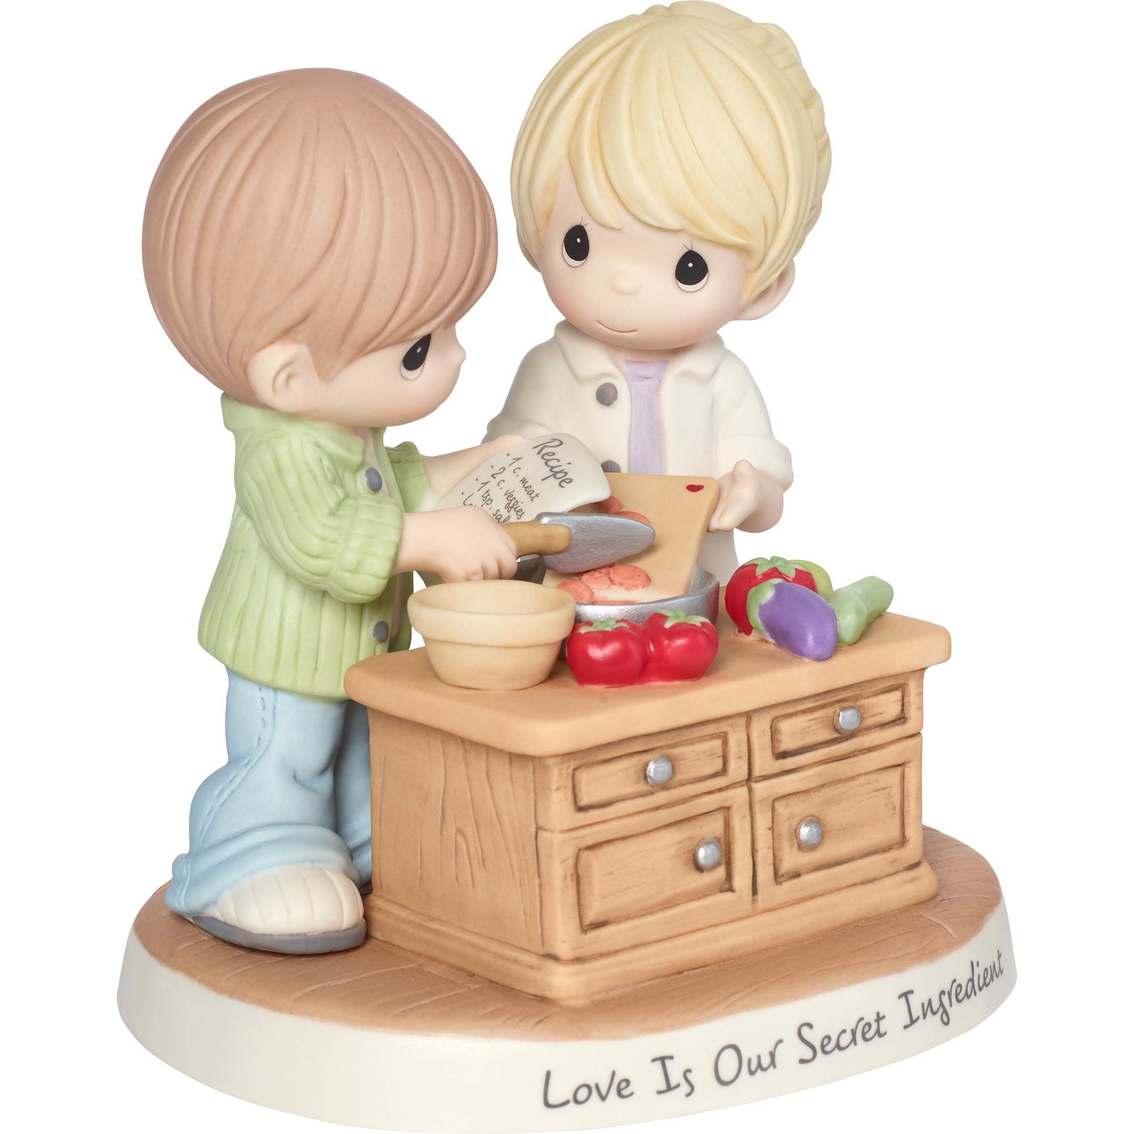 Precious Moments Love Is Our Secret Ingredient Bisque Porcelain Figurine, Giftware & Collectibles, Food & Gifts